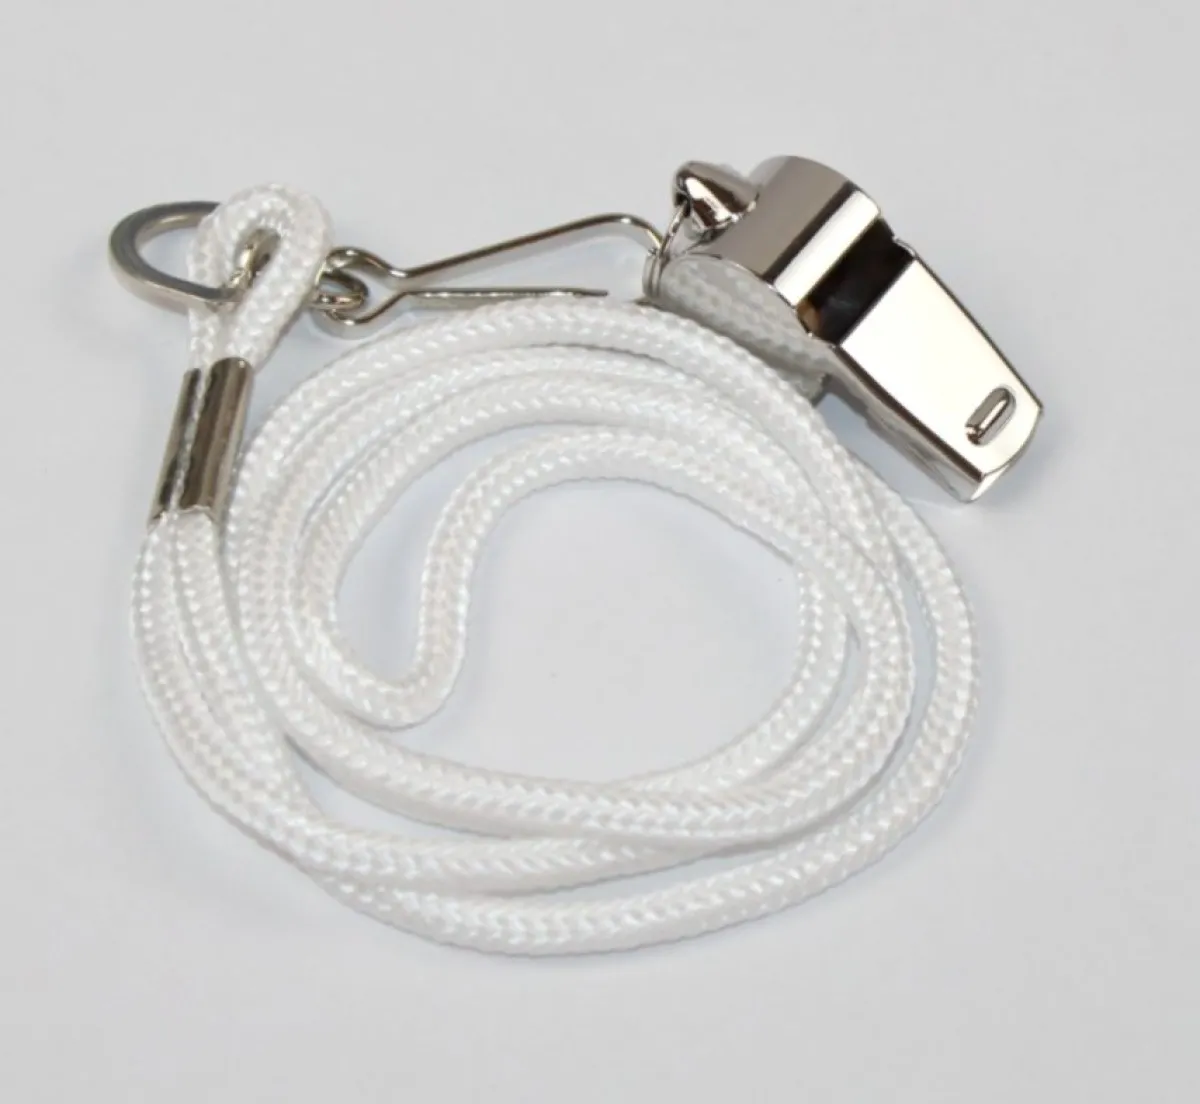 Metal whistle with white band